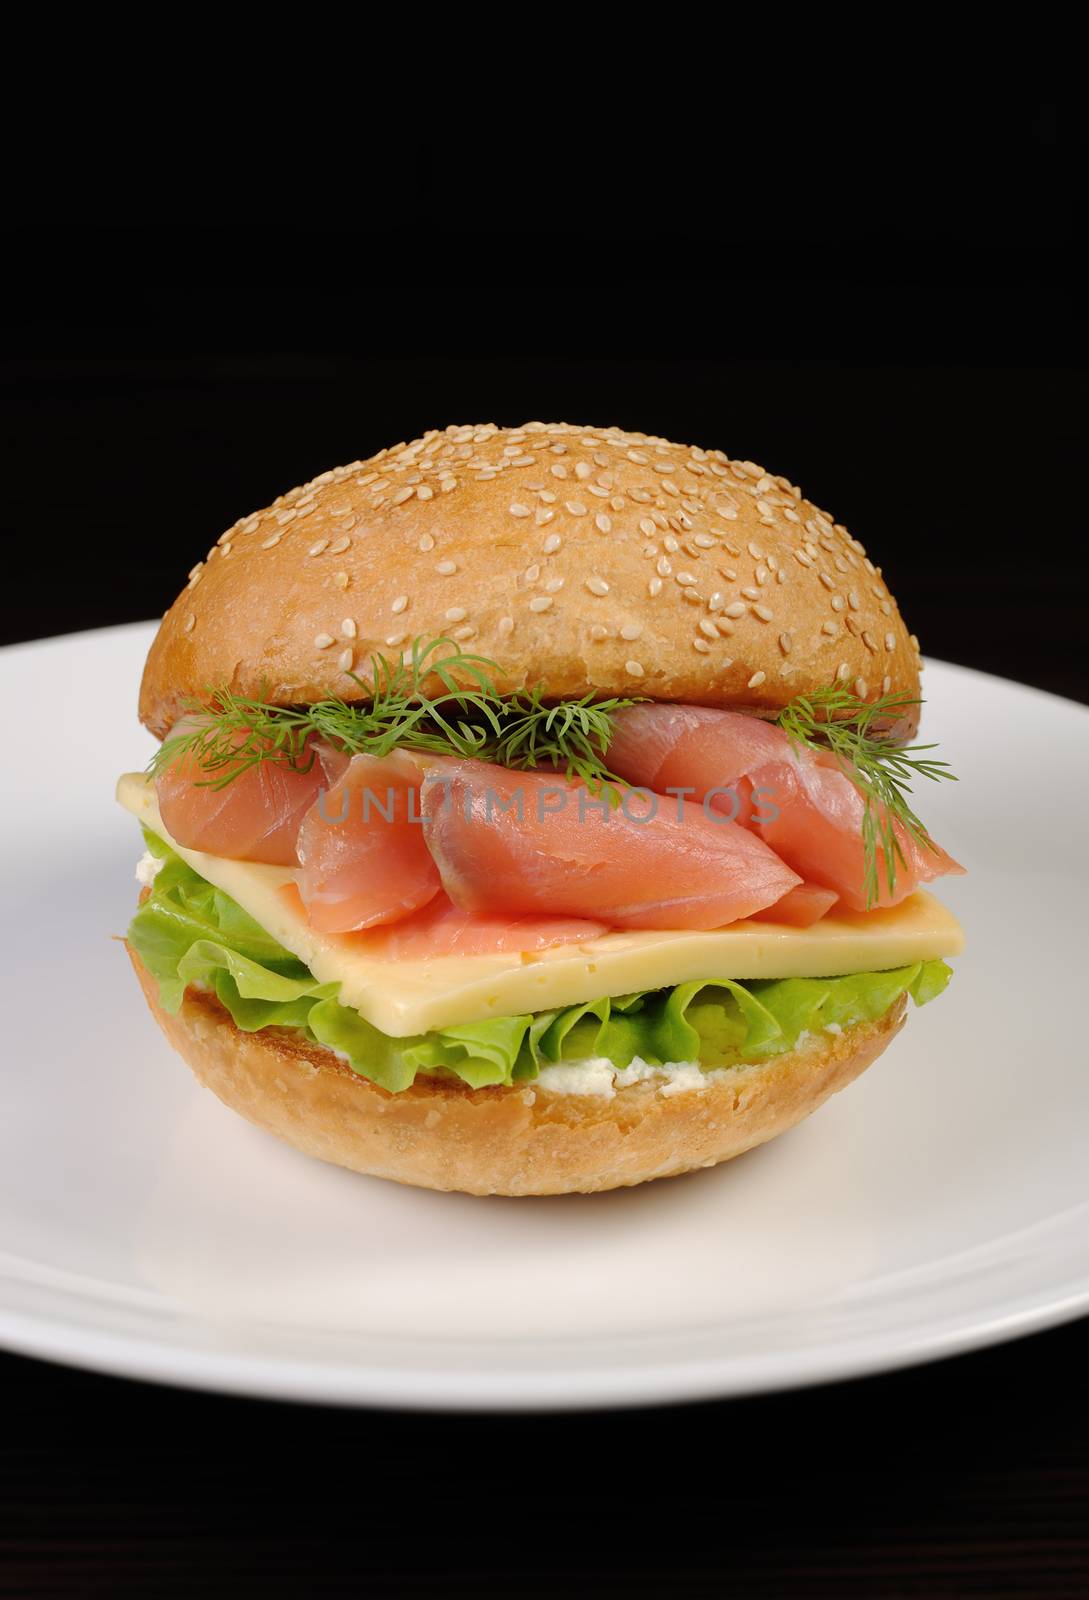 Appetizing bun with sesame seeds and thin slices of cheese with salmon